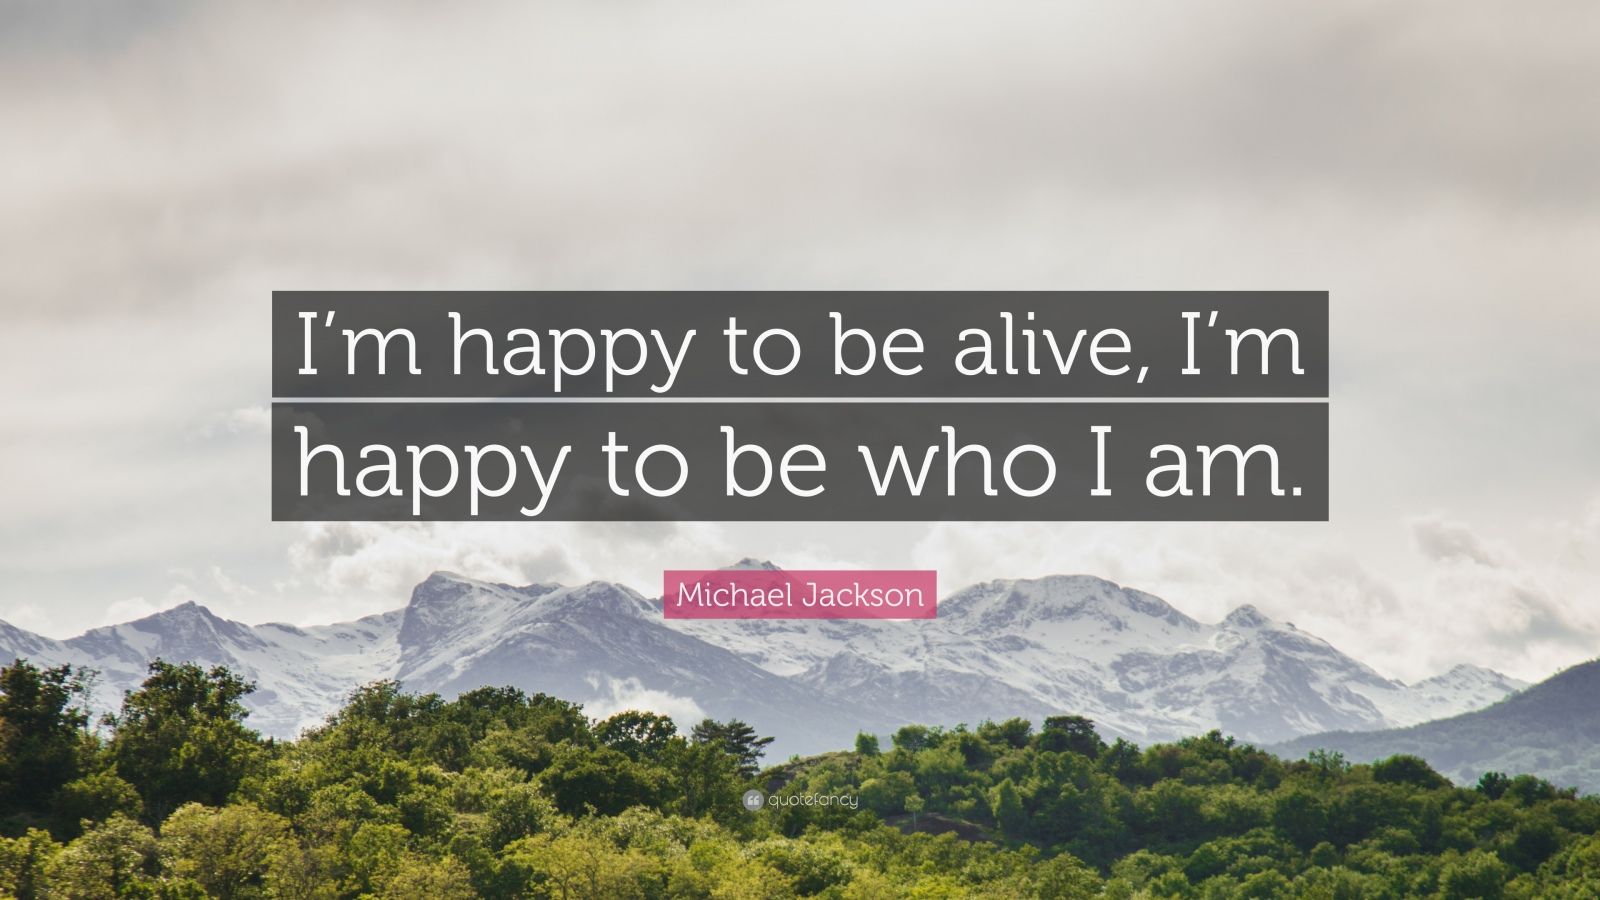 Michael Jackson Quote: “I'm happy to be alive, I'm happy to be who ...